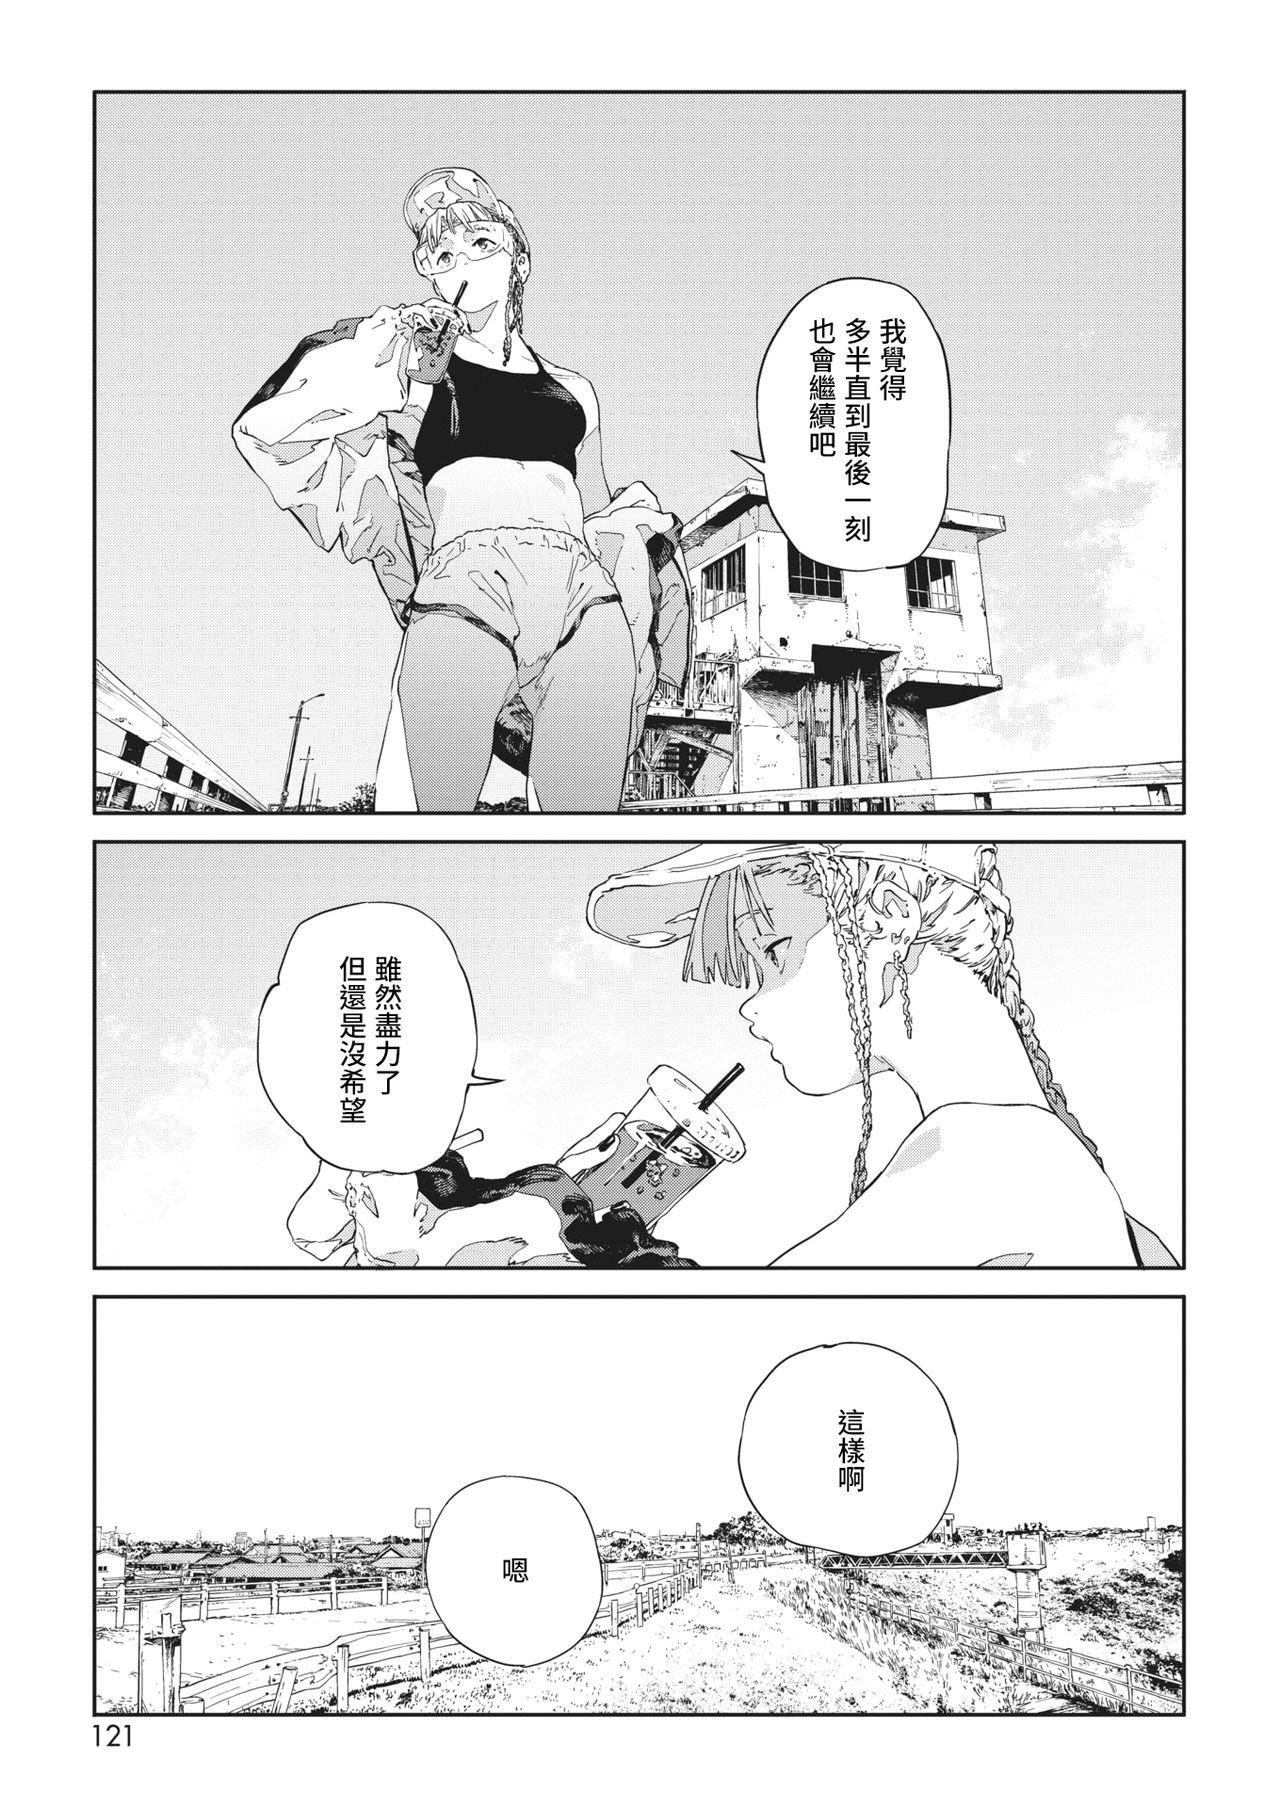 Gym Bug is Deadlock | 所谓漏洞 即是僵局 Swallow - Page 4